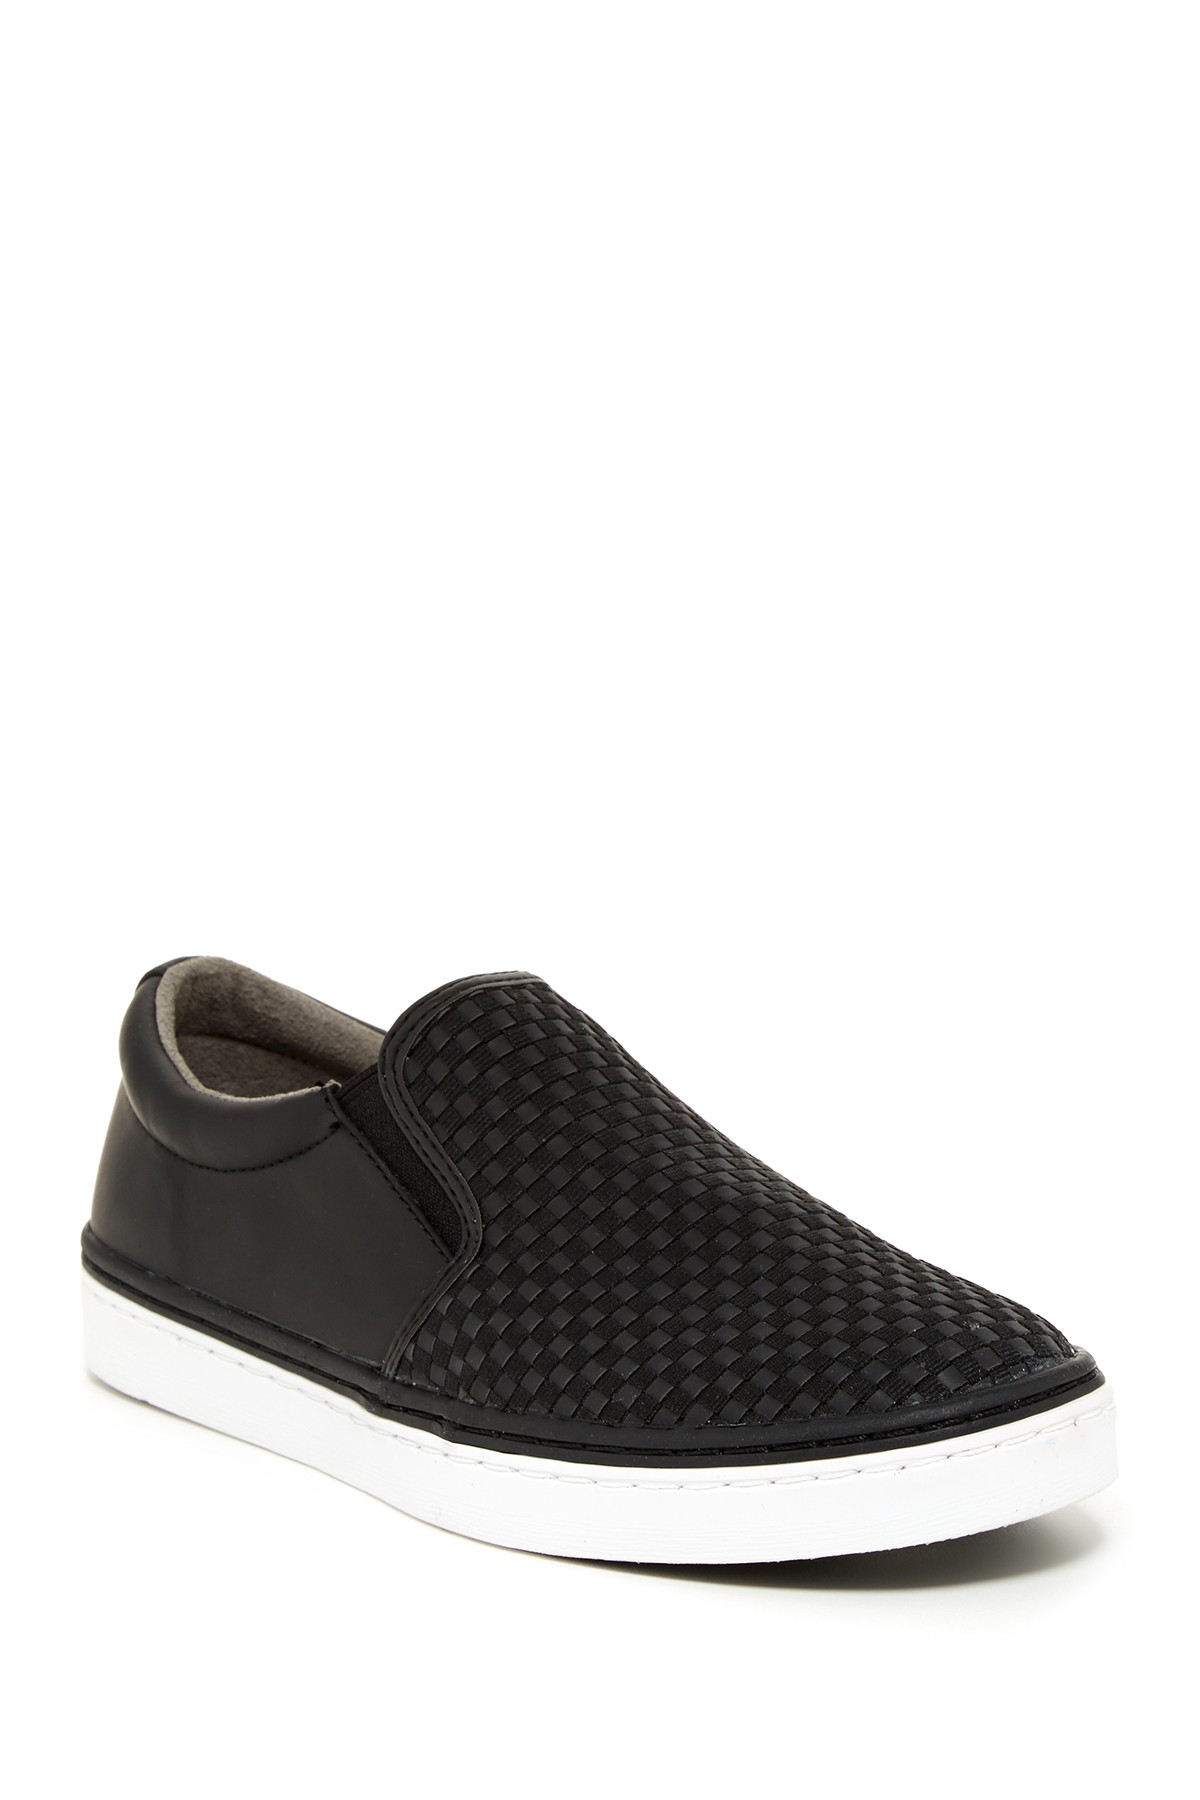 Cole Haan Leather Falmouth Slip-on Sneaker in Black - Lyst